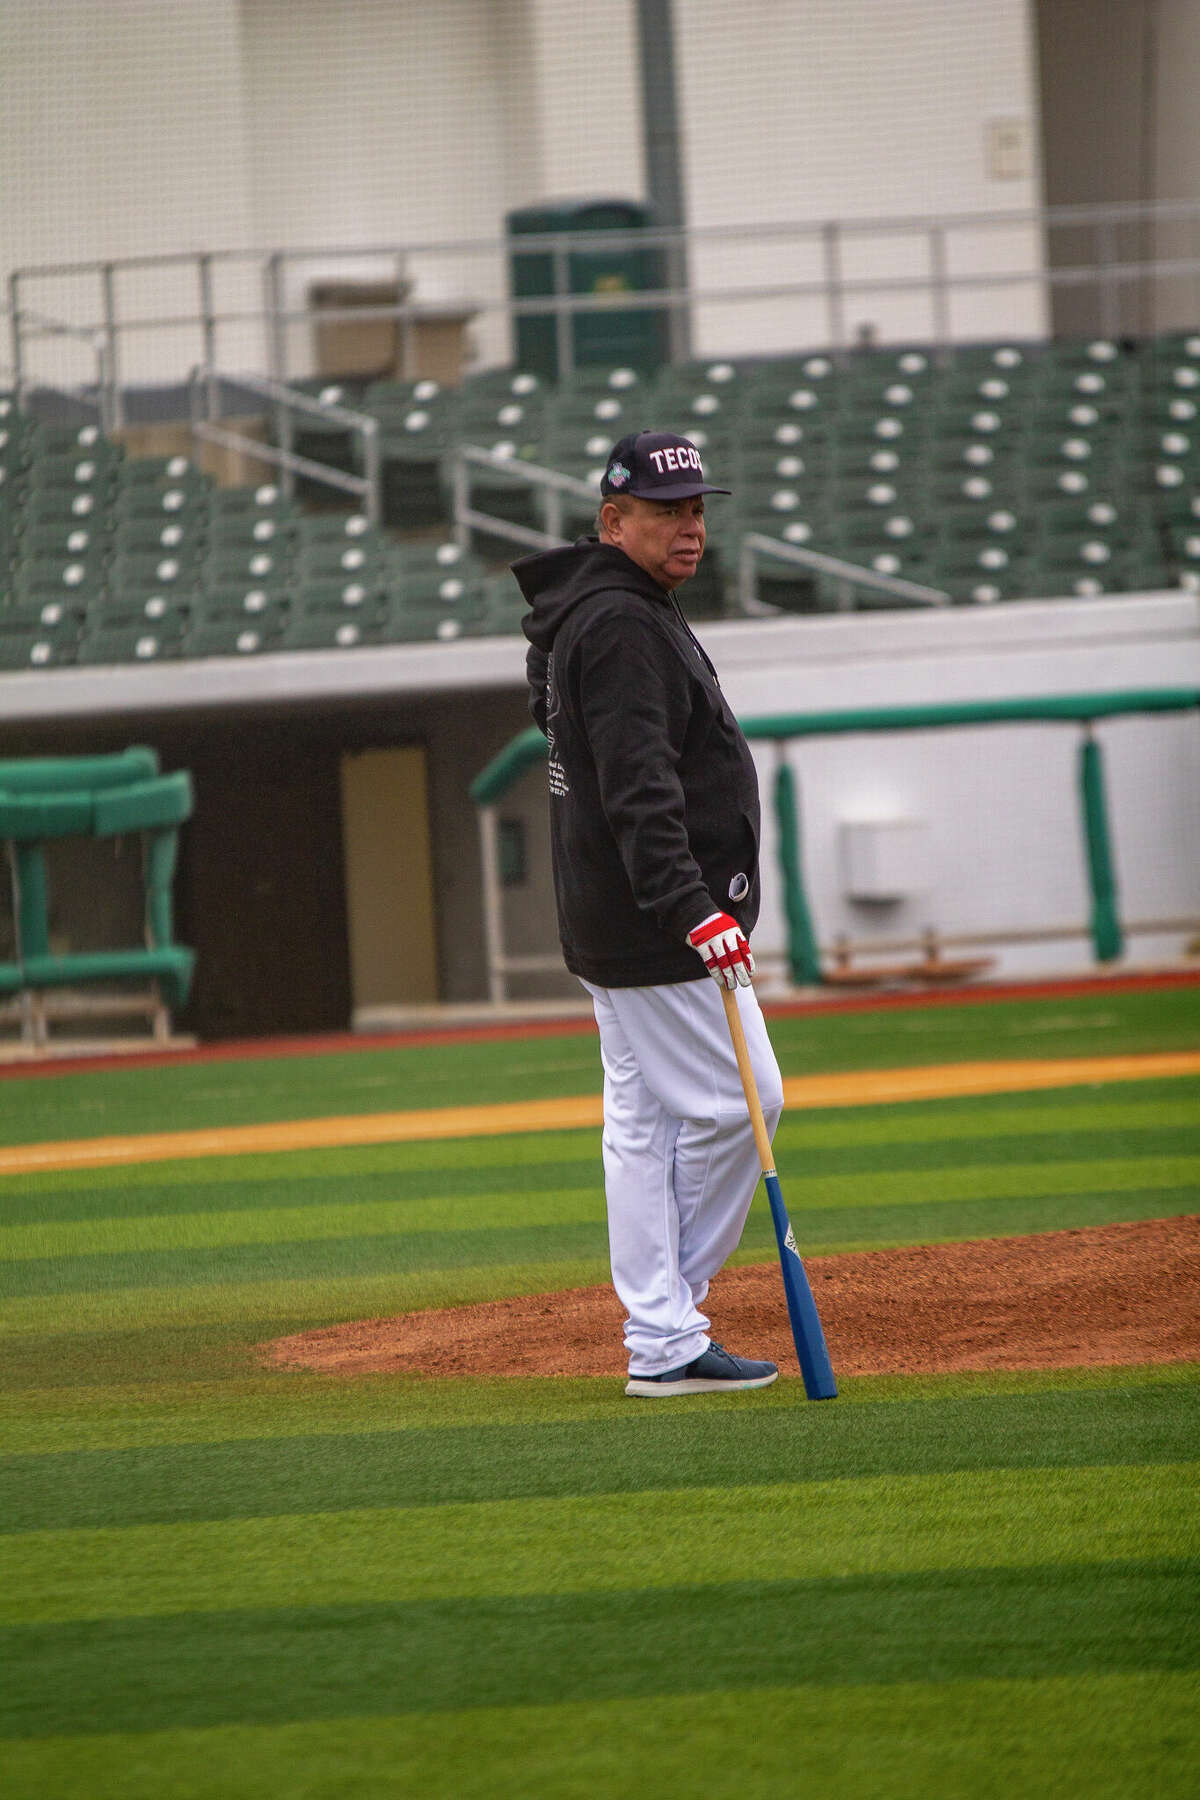 Manager Felix Fermin is back to lead the Tecolotes Dos Laredos this season.